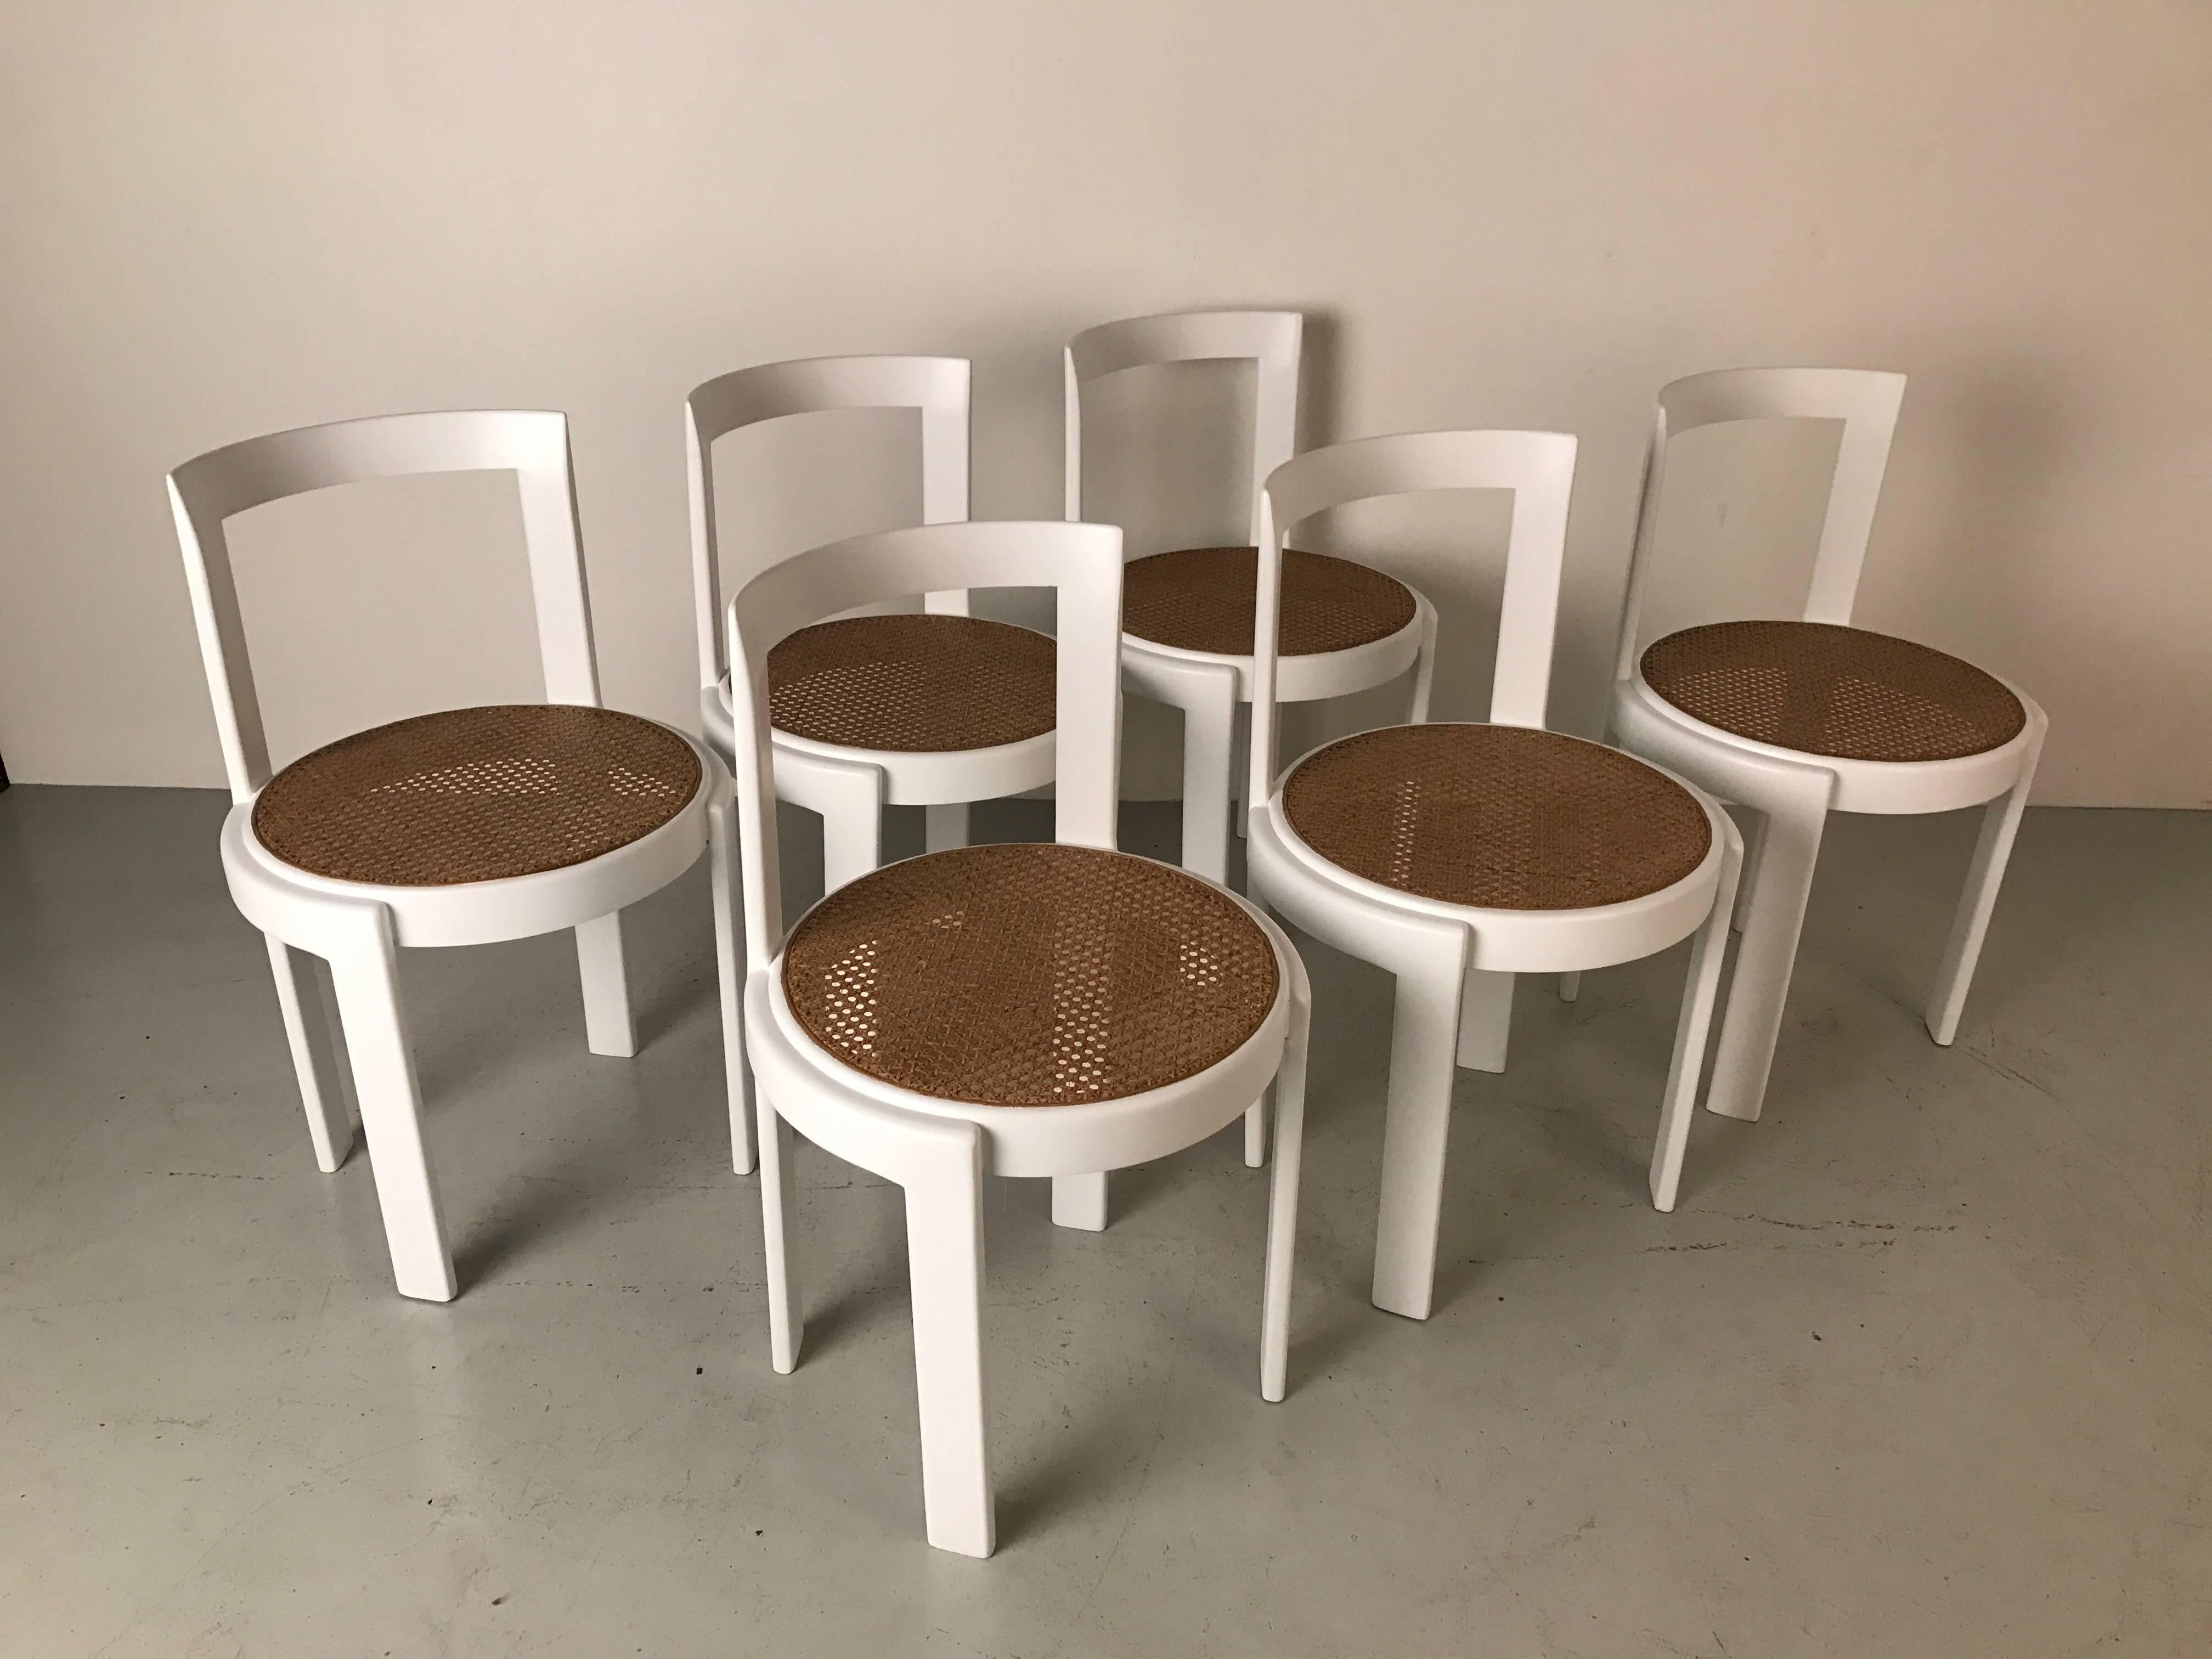 Great set of 6 Italian bentwood dining chairs - newly refinished in white with newly caned seats.  Great curves and lines. 

.